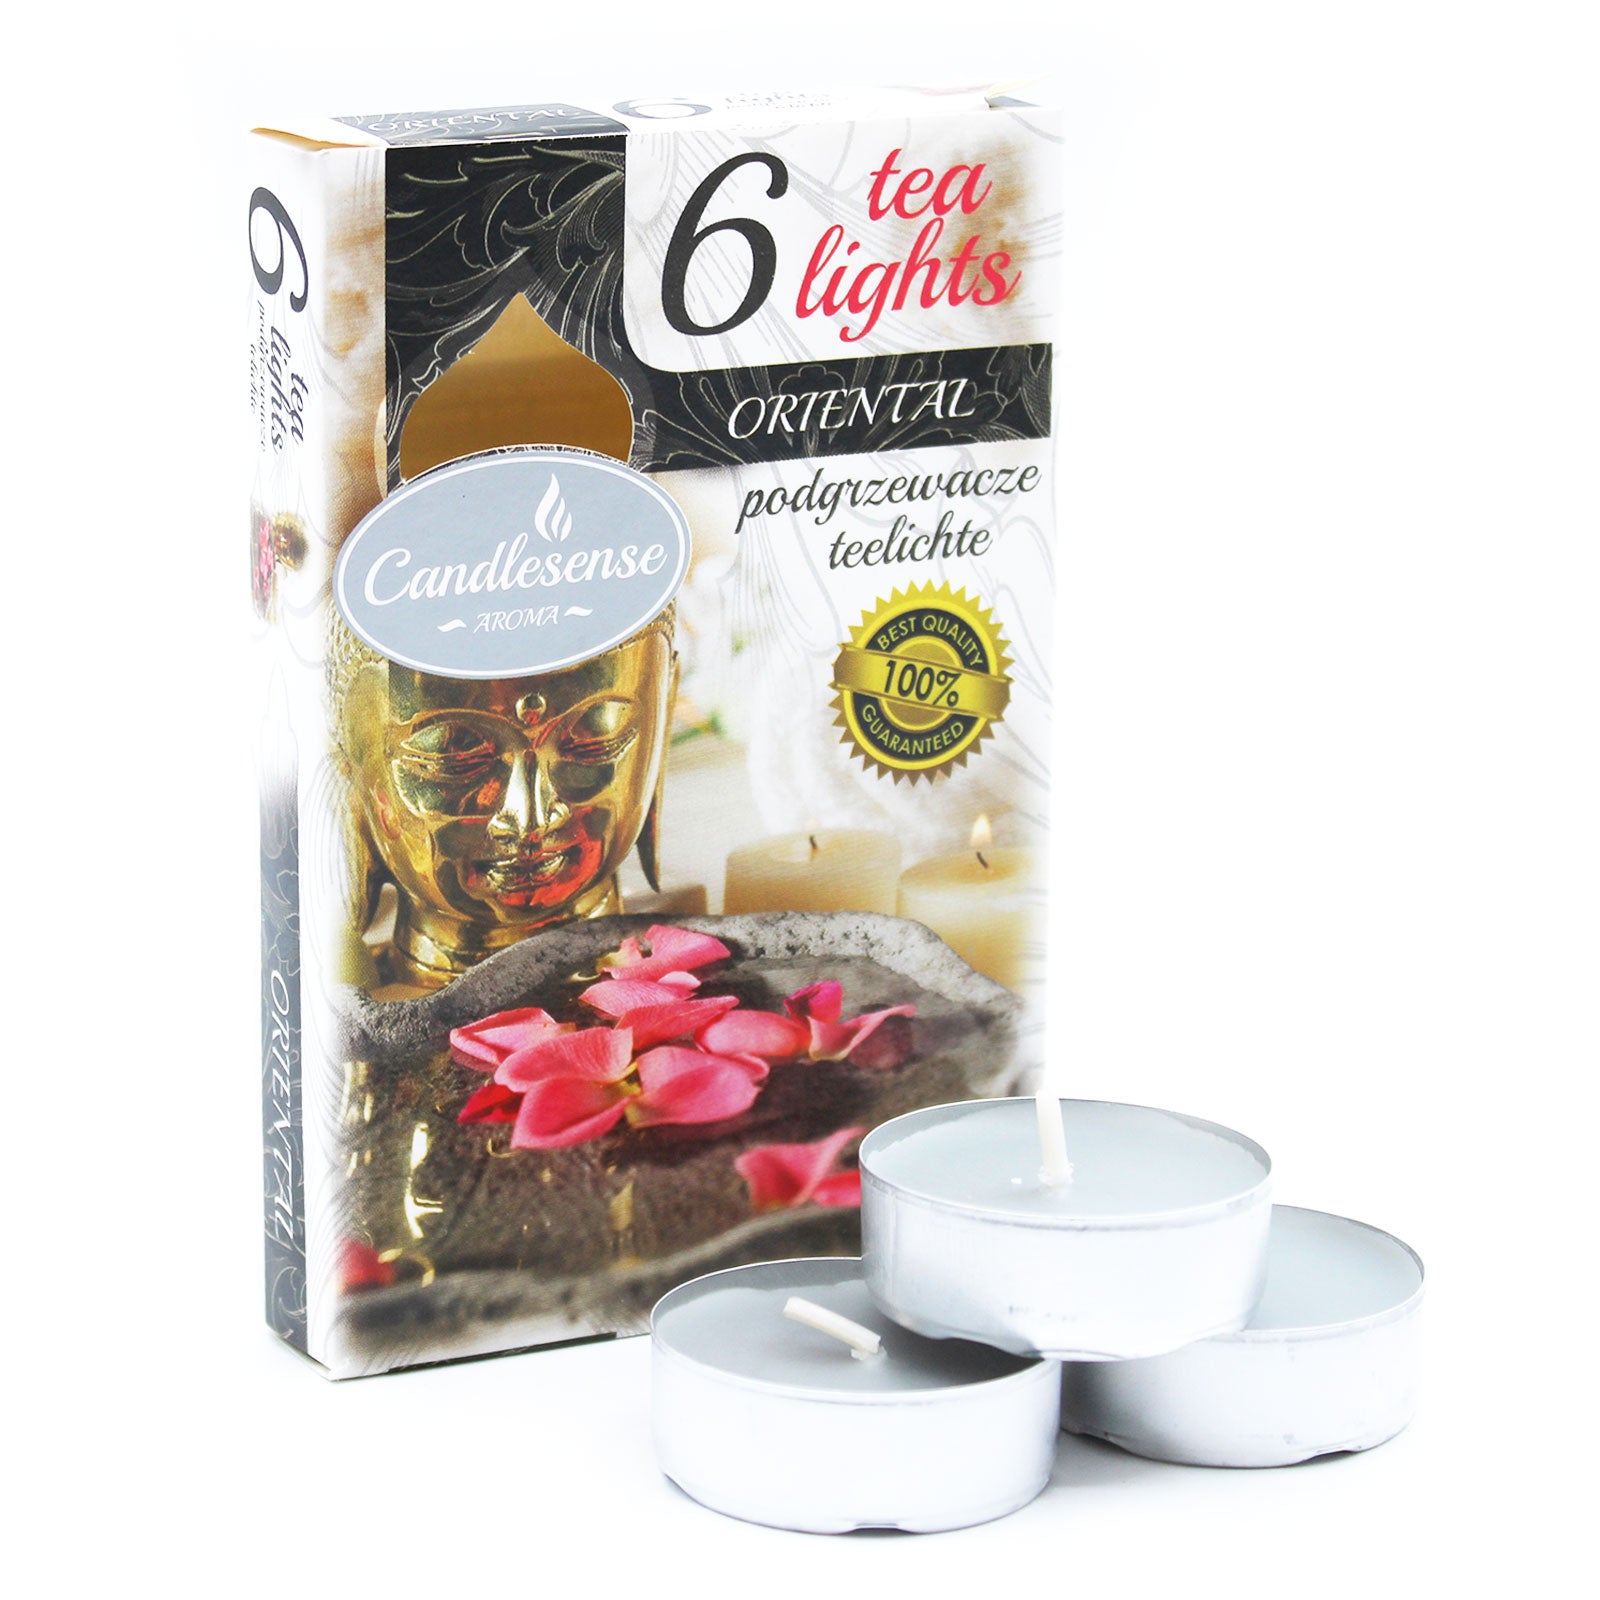 View Set of 6 Scented Tealights Oriental information